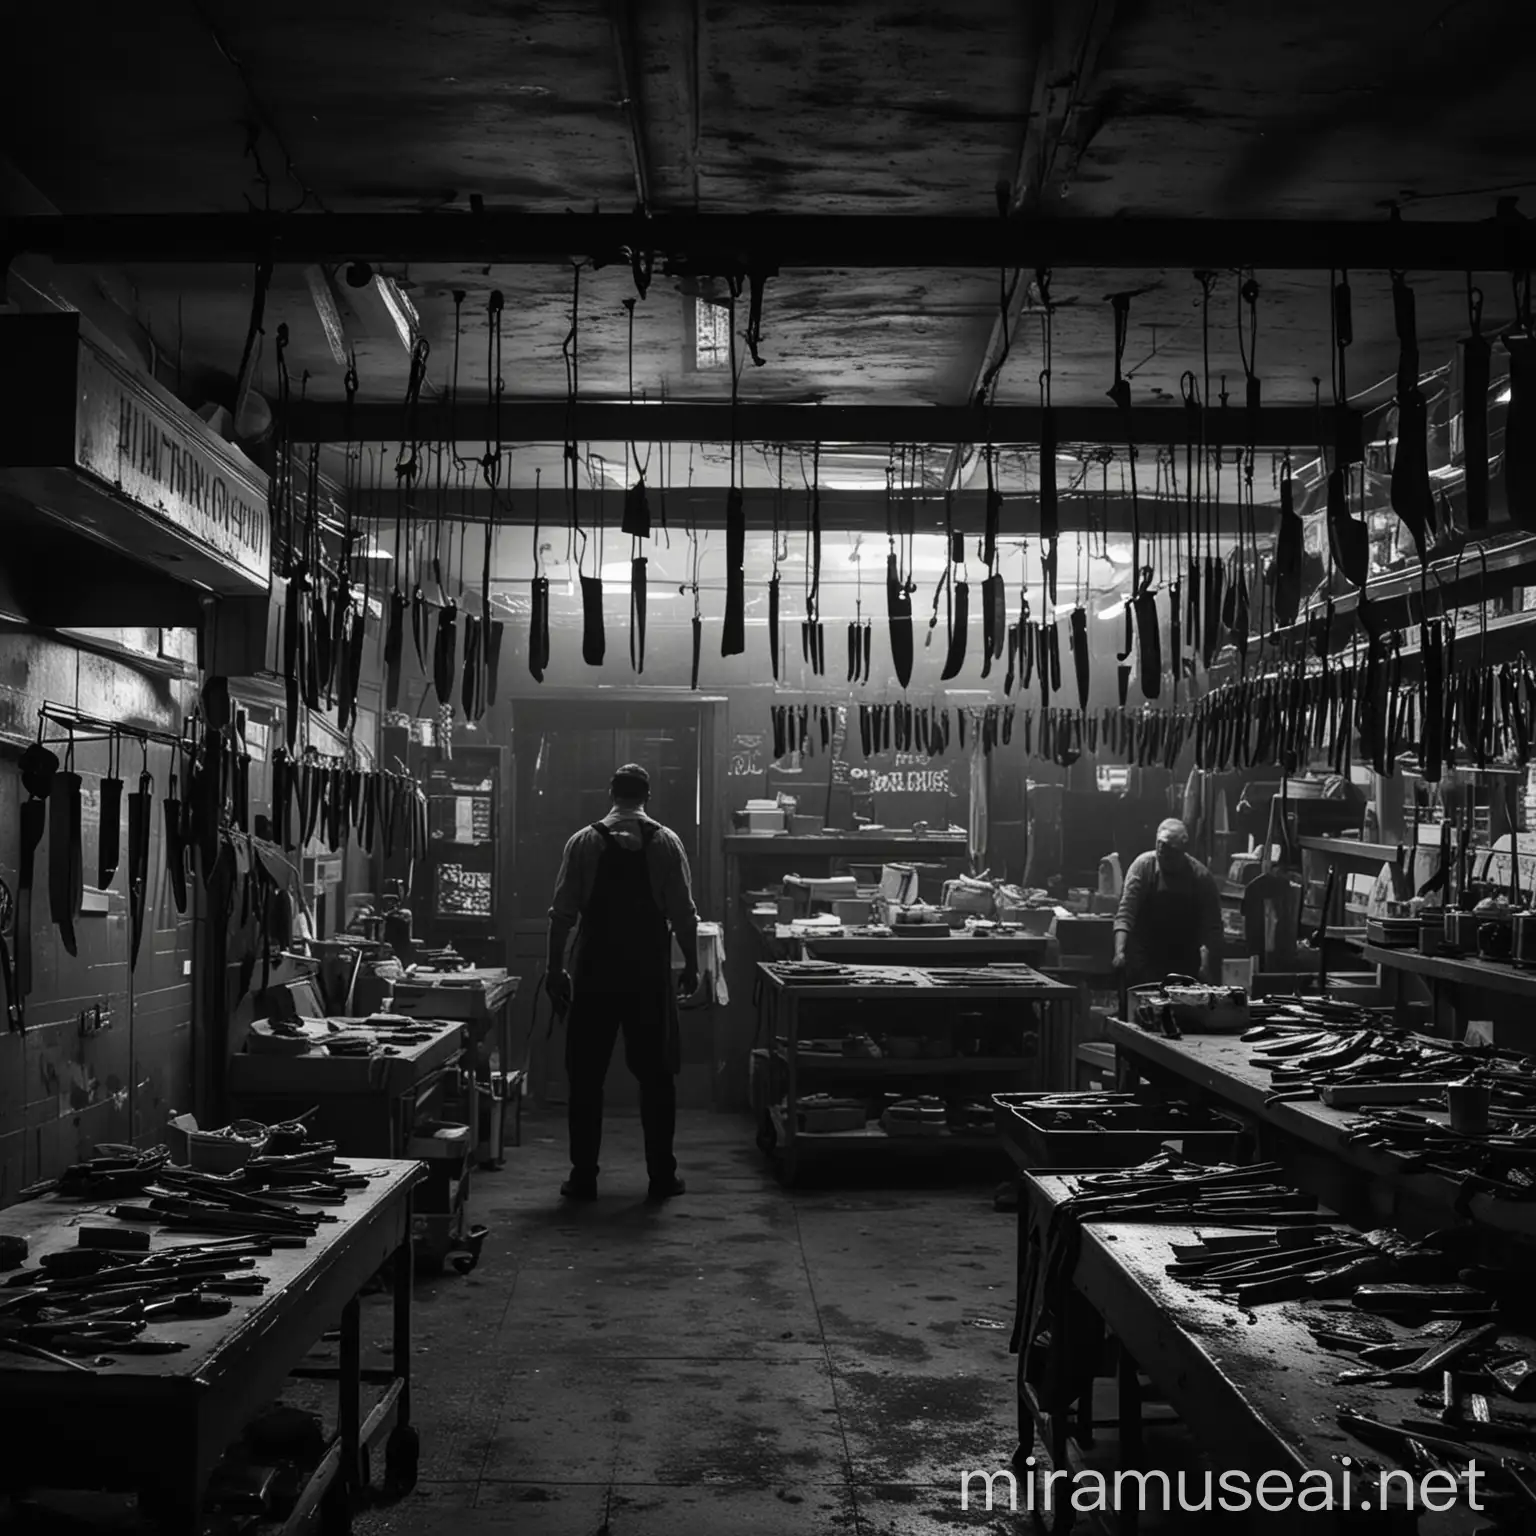 inside a film noir horror film in a butcher shop with knives, axes, and meathooks hanging from the ceiling of the butcher shop. the butcher shop is dark, cold and industrial with sharp objects everywhere. the butcher shop is scary